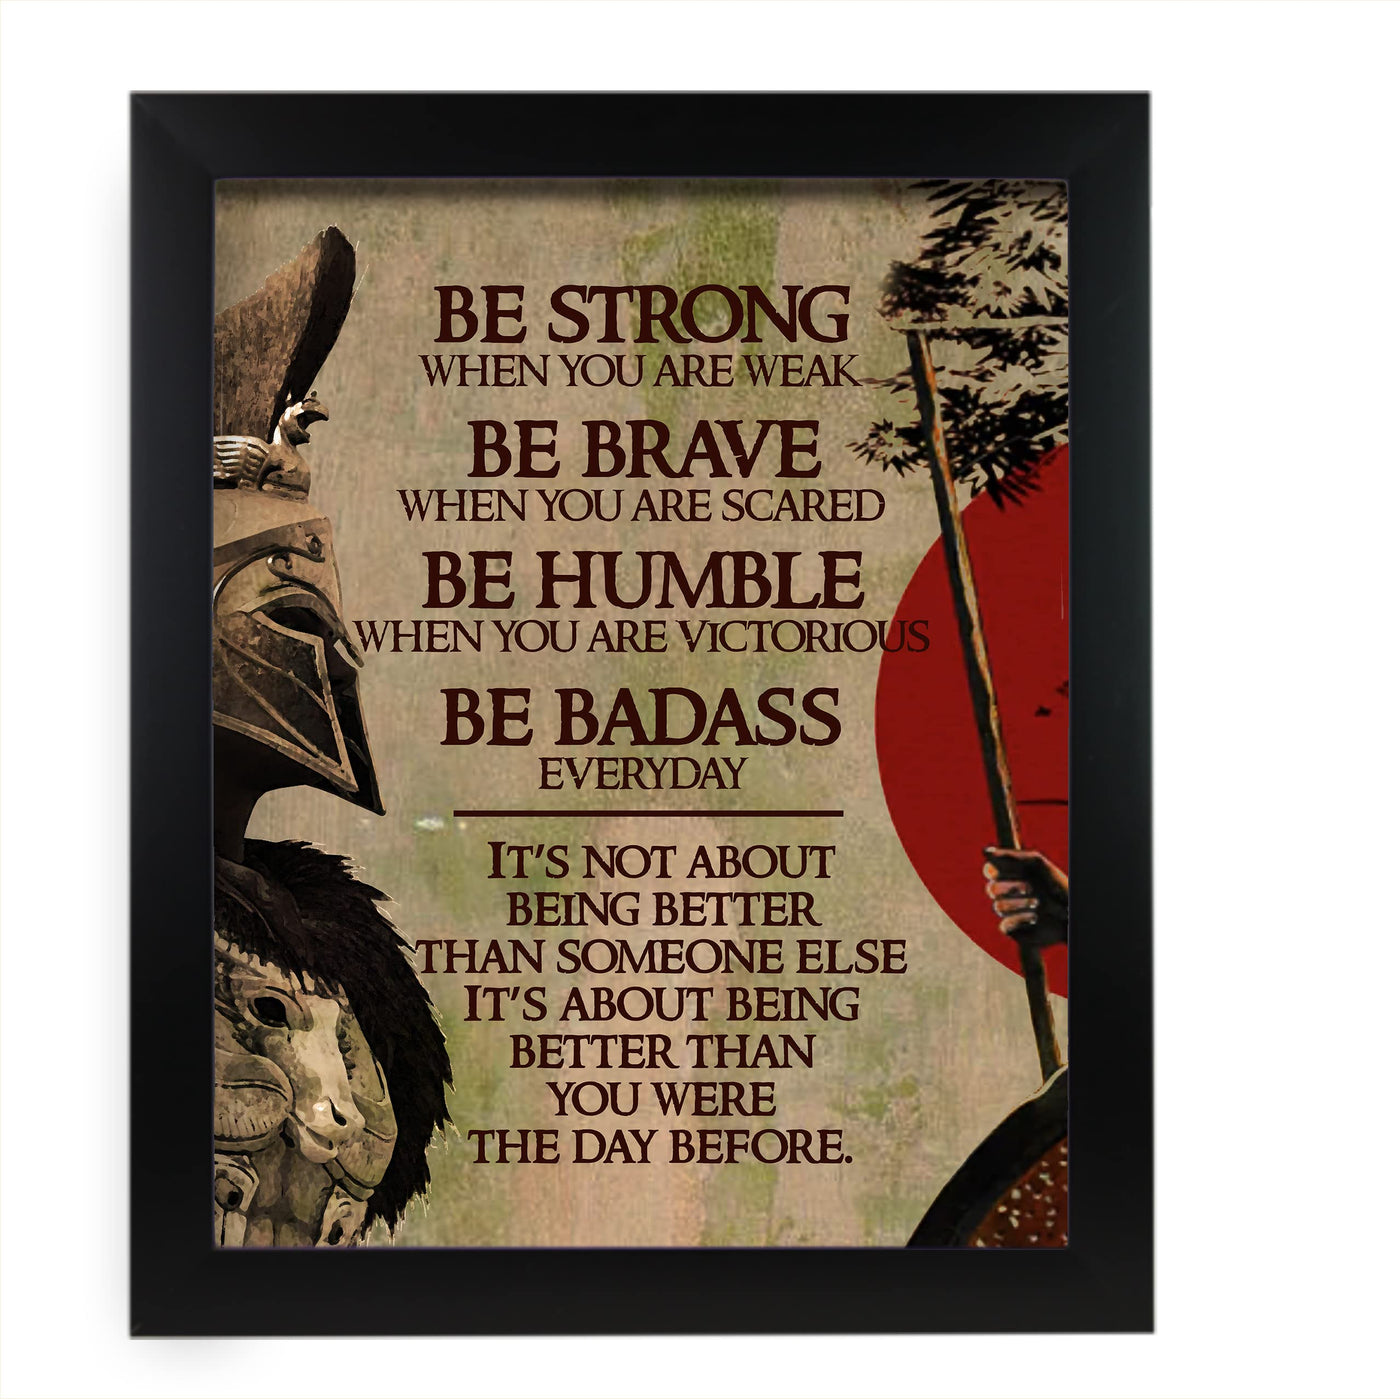 Be Strong When You Are Weak Motivational Warrior Quotes Wall Art -11x14" Rustic Spiritual Fighter Print -Ready to Frame. Inspirational Home-Dojo-Gym-Office-Classroom Decor. Life Quote for Warriors!